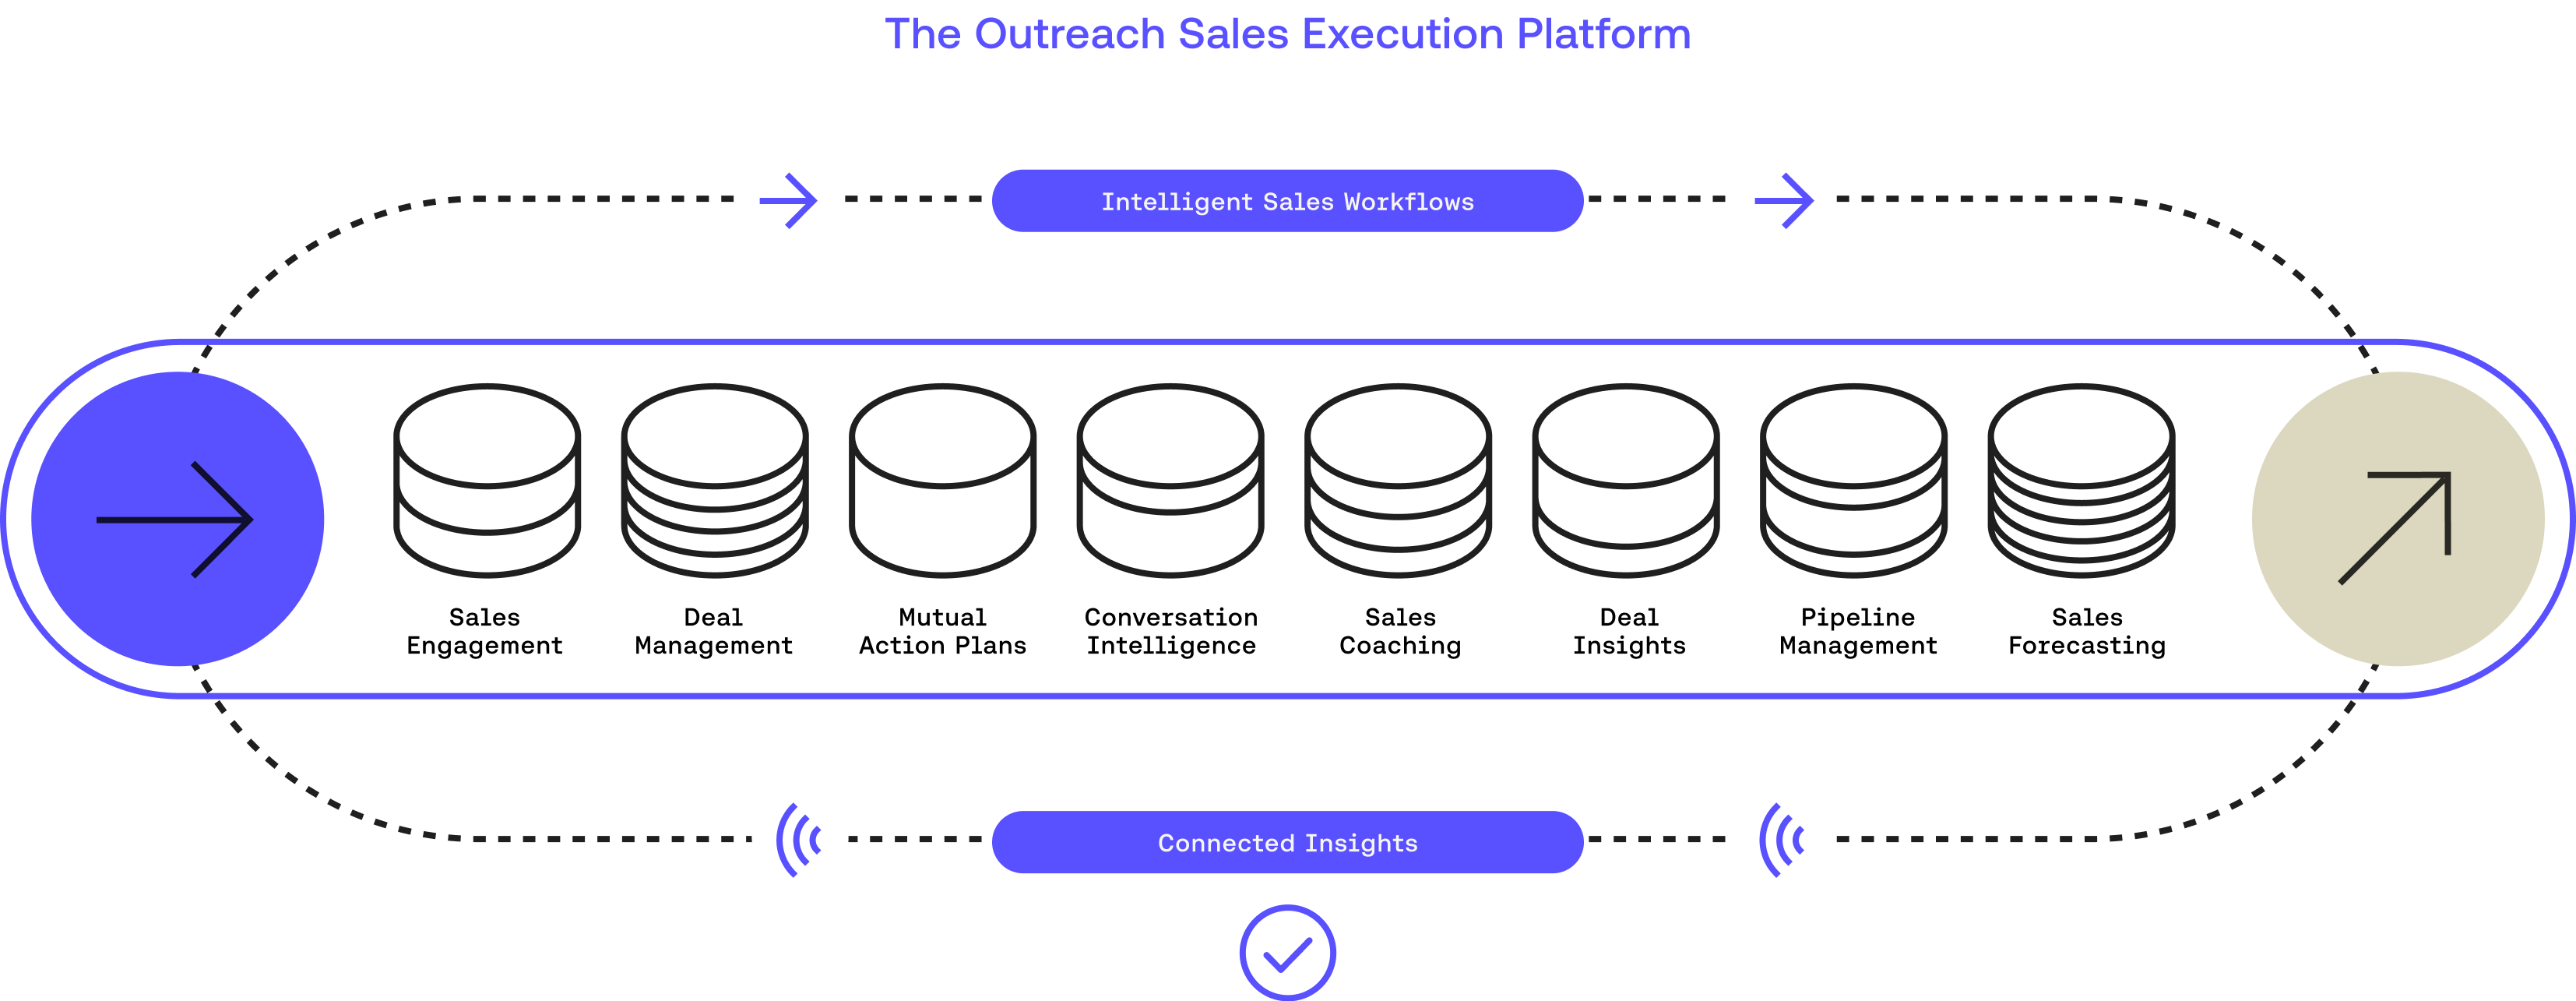 graphic illustrating the outreach sales execution platform